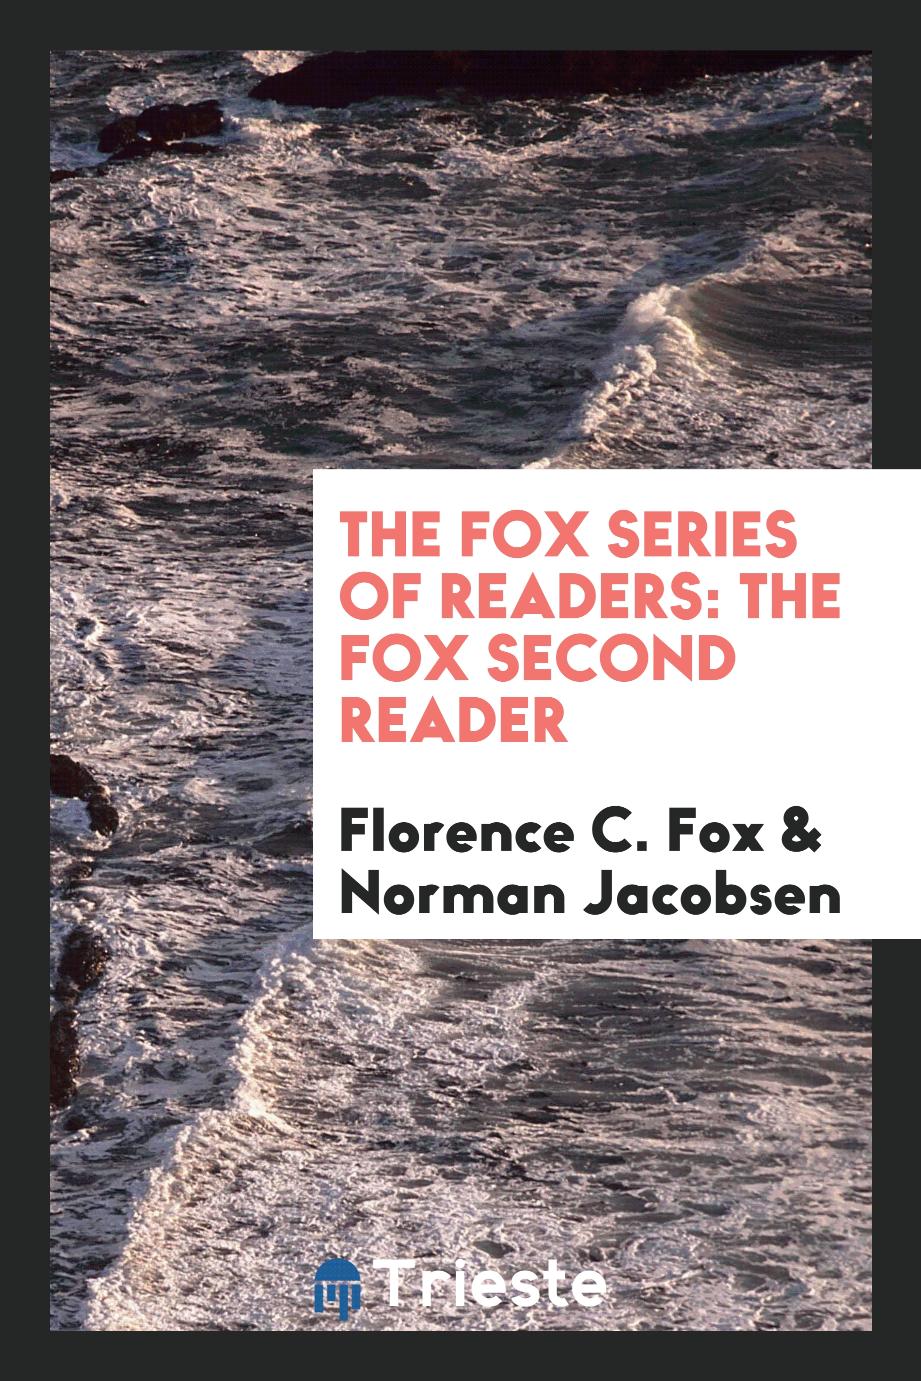 The Fox Series of Readers: The Fox Second Reader